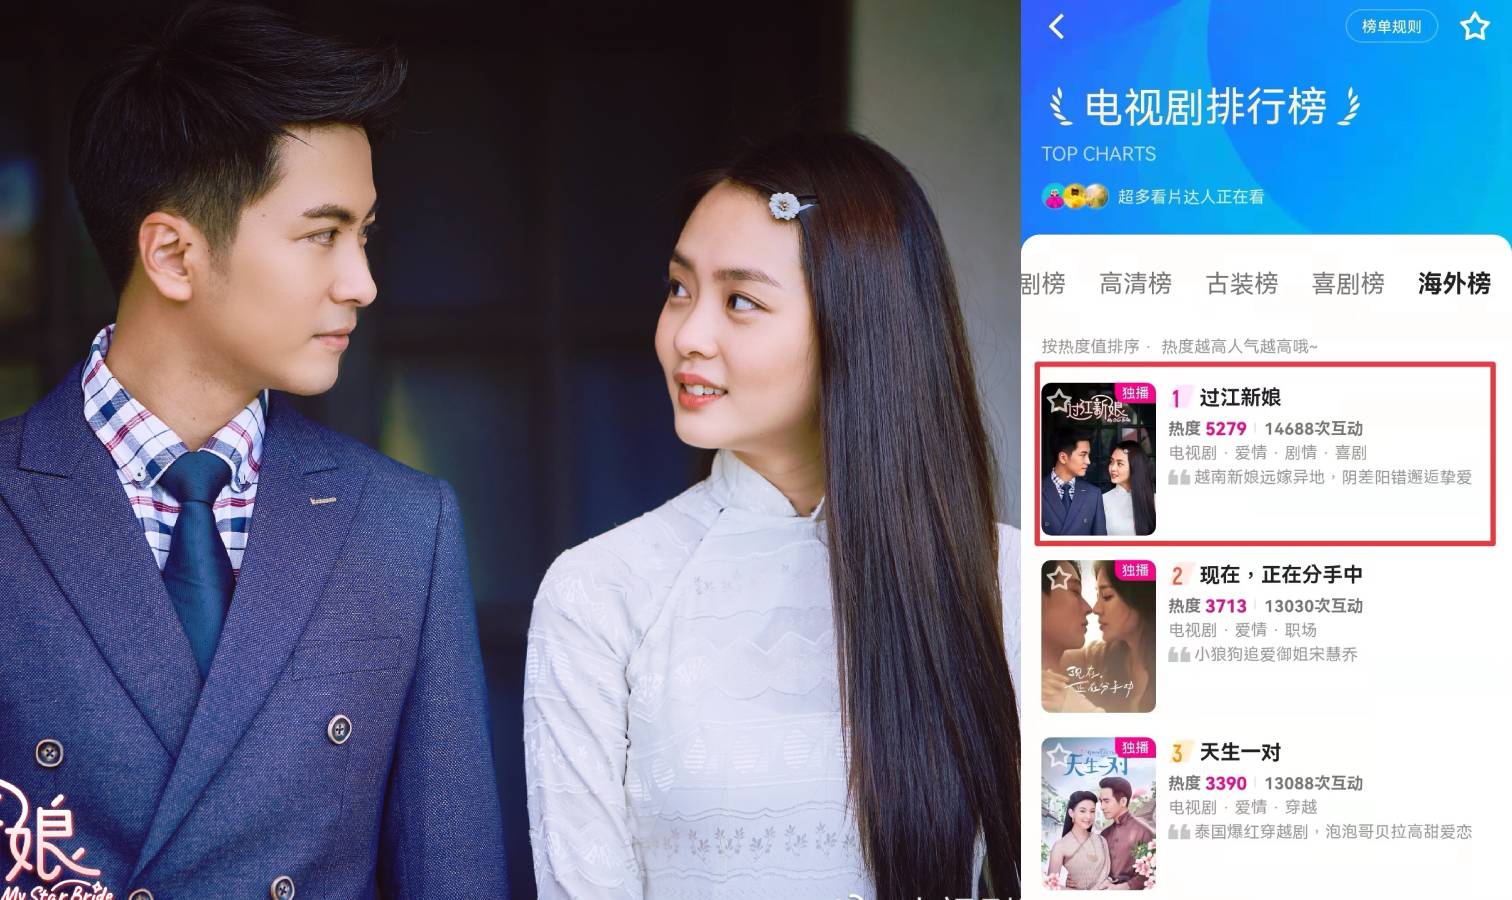 My Star Bride Tops List Of Trending Foreign Dramas On Youku 3 Days After Its Release On The Chinese Video Platform